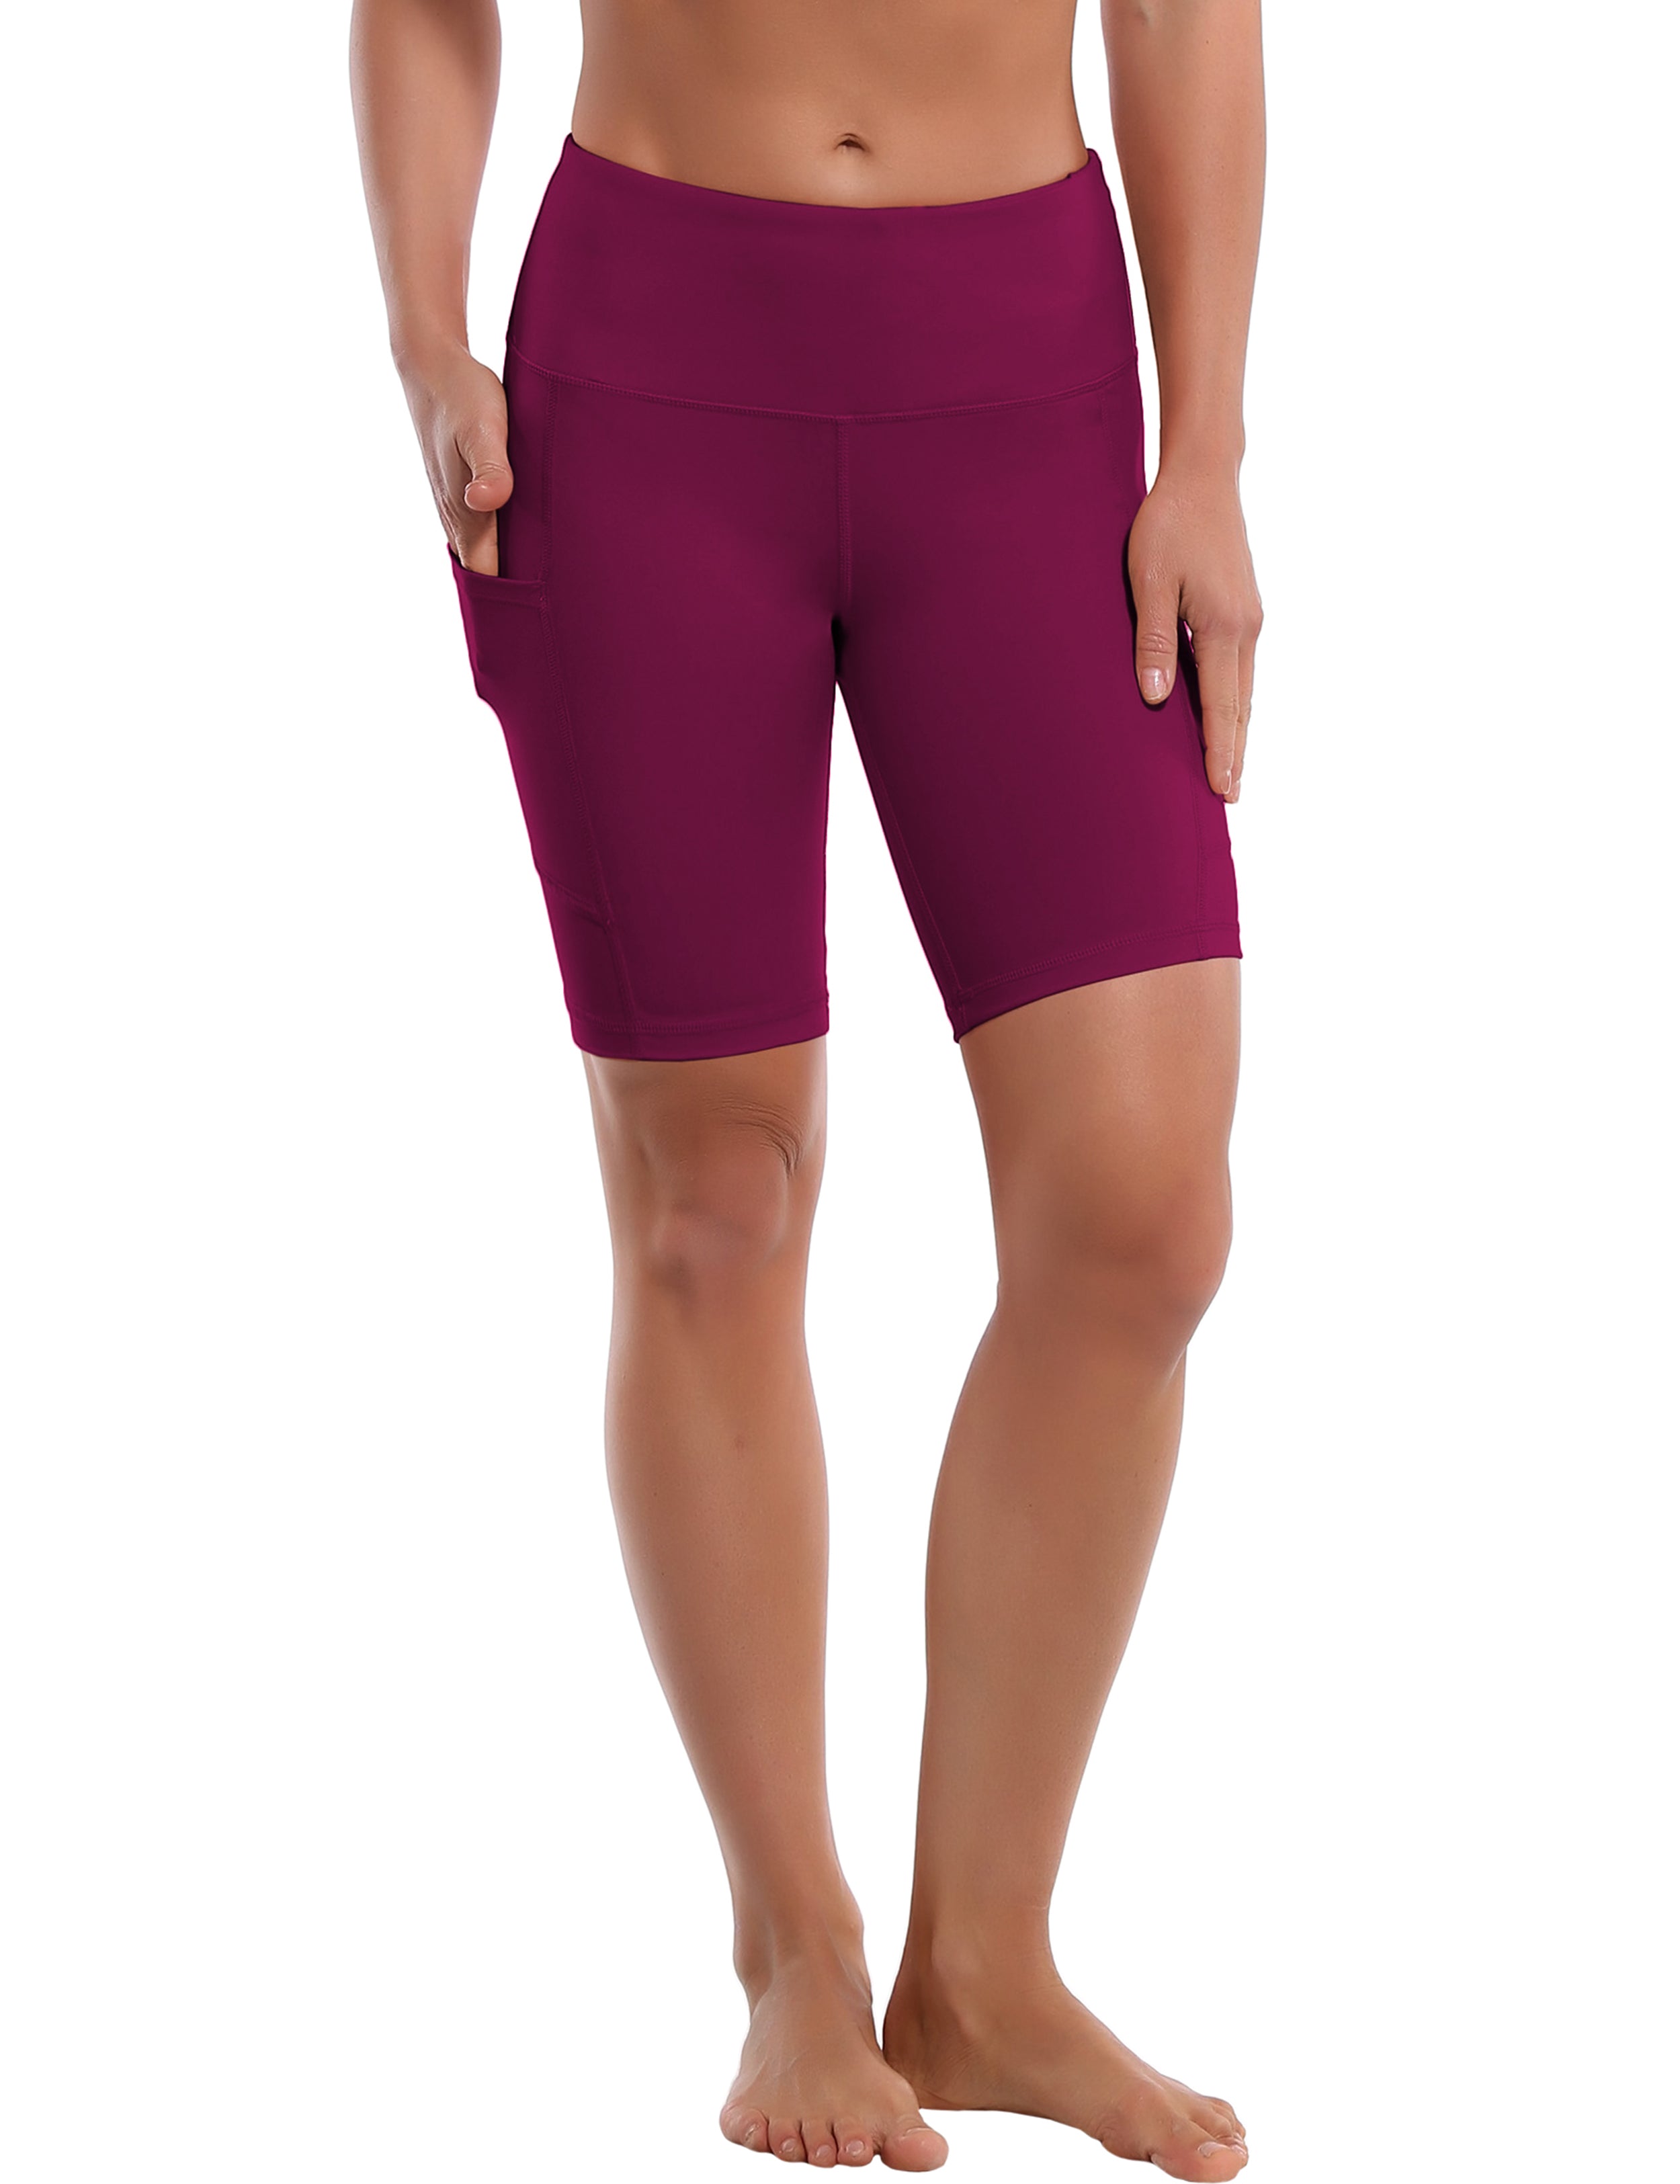 8" Side Pockets Pilates Shorts grapevine Sleek, soft, smooth and totally comfortable: our newest style is here. Softest-ever fabric High elasticity High density 4-way stretch Fabric doesn't attract lint easily No see-through Moisture-wicking Machine wash 75% Nylon, 25% Spandex